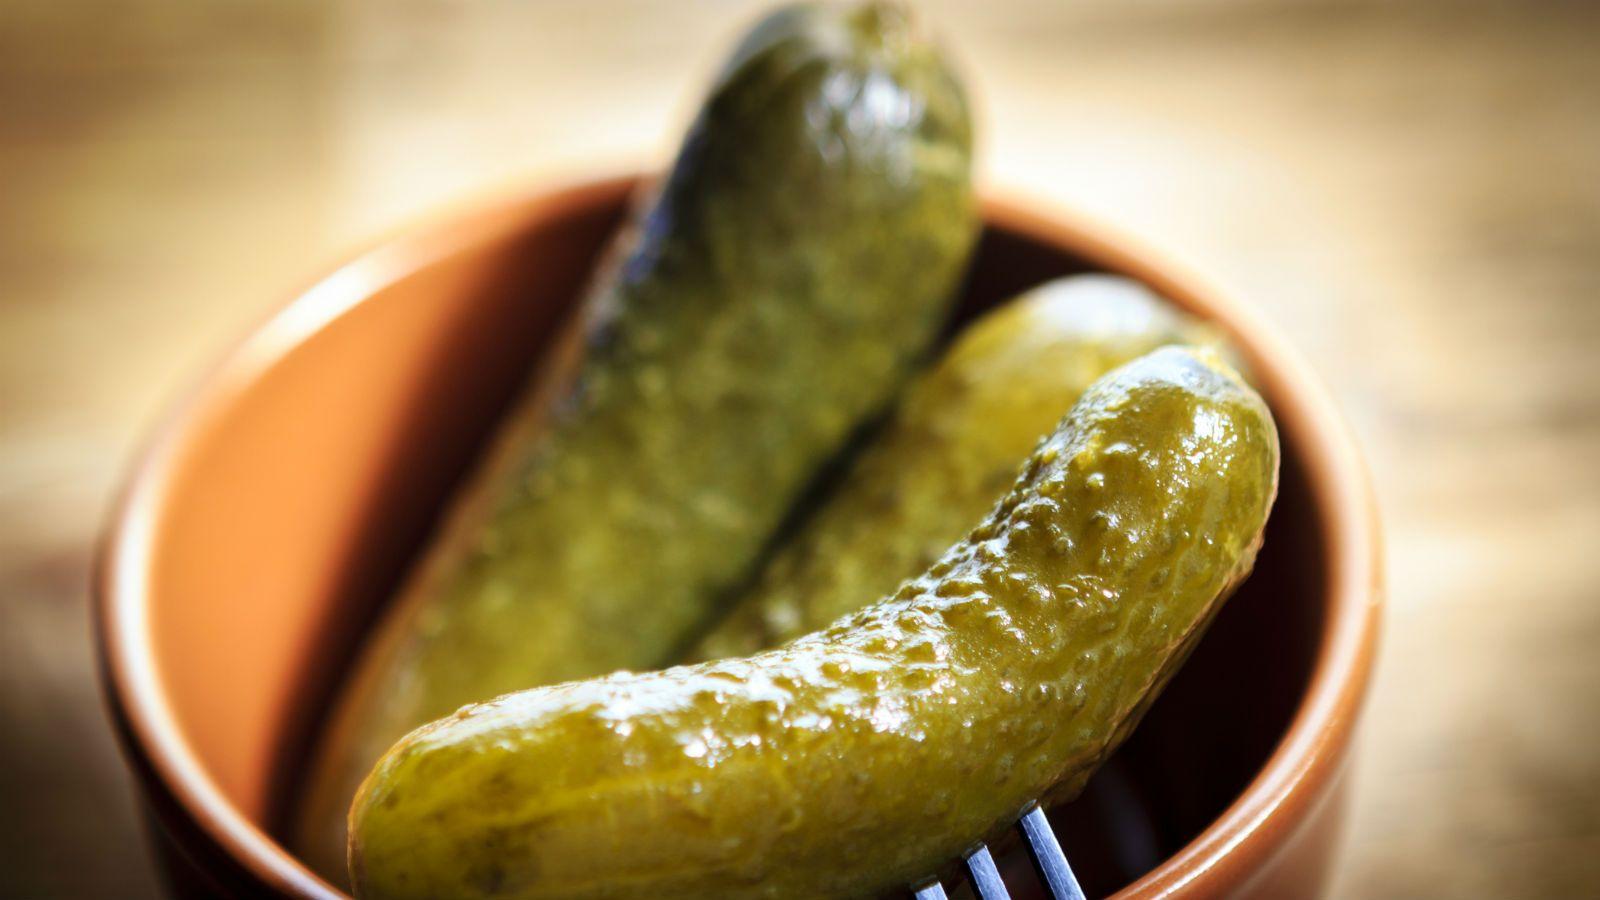 This Dill Pickle Recipe Goes Too Far